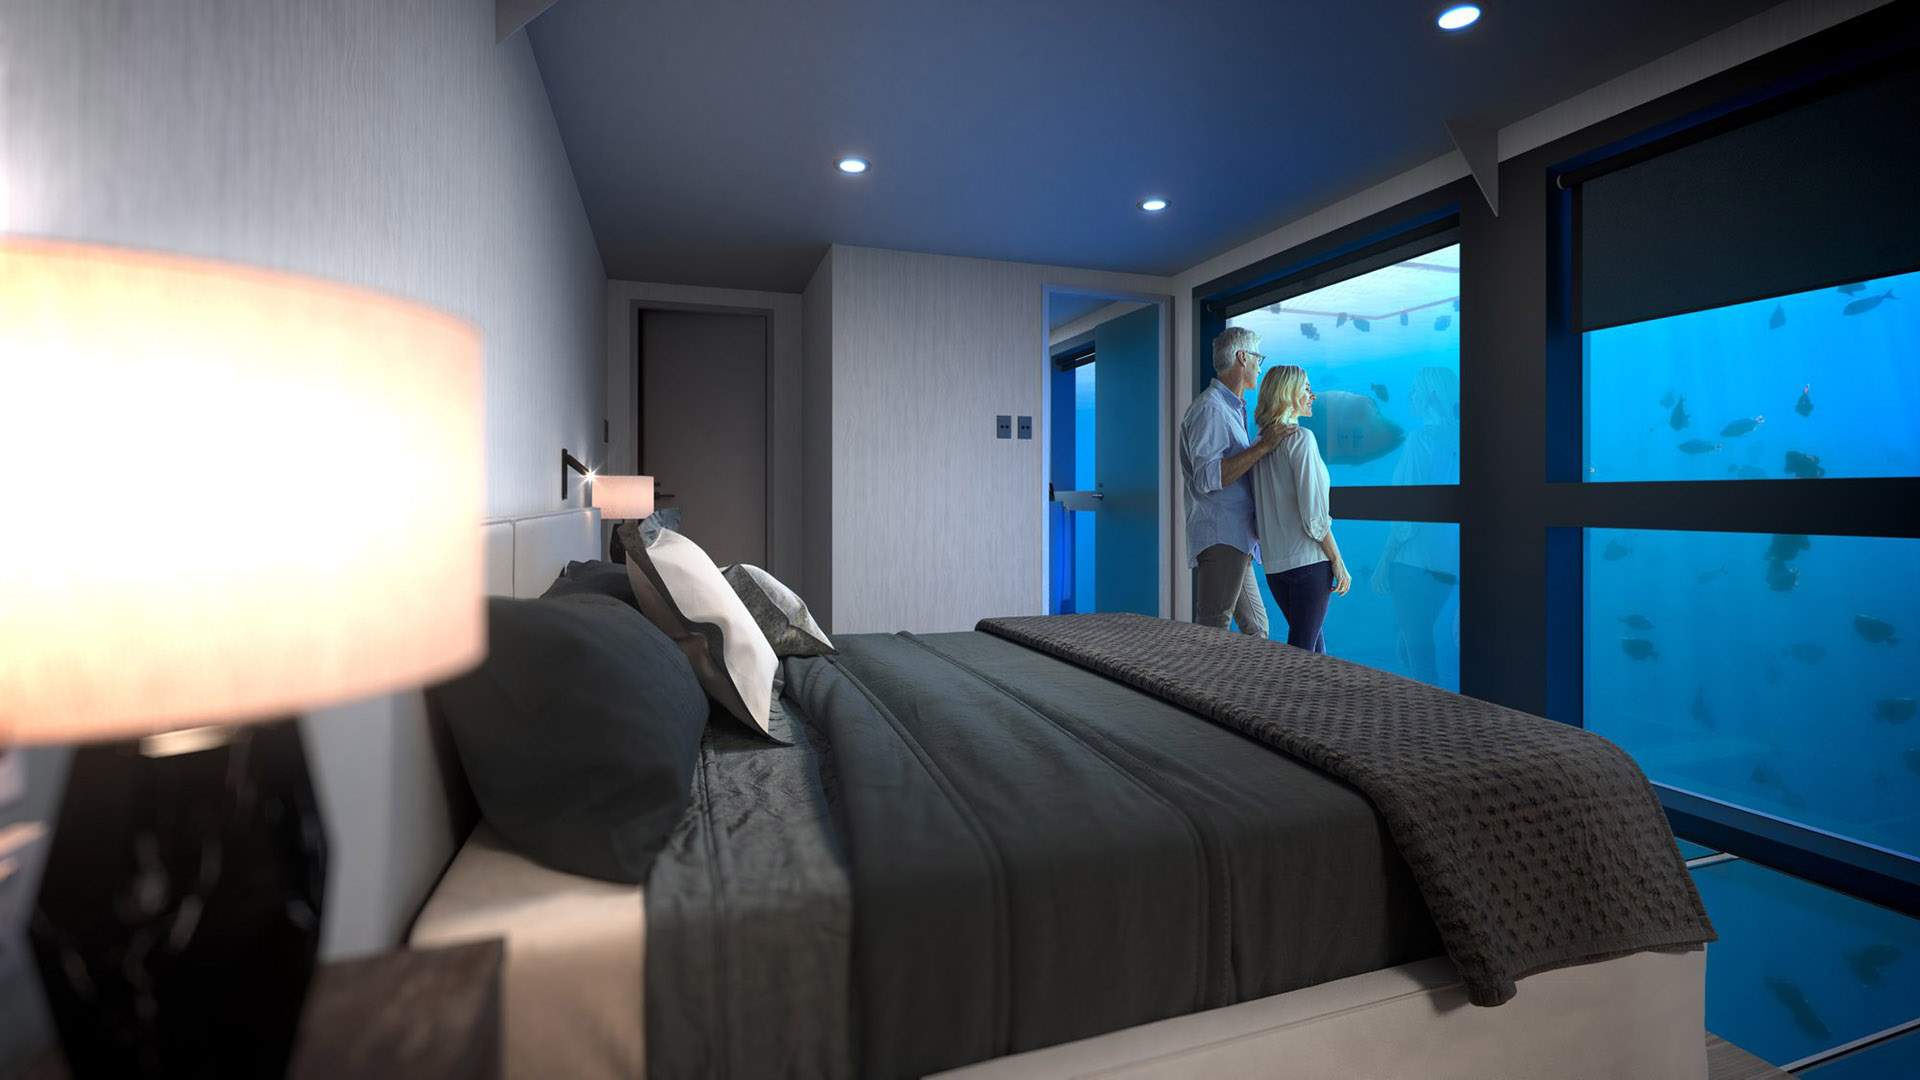 The Great Barrier Reef Is Set to Score Its First Underwater Hotel